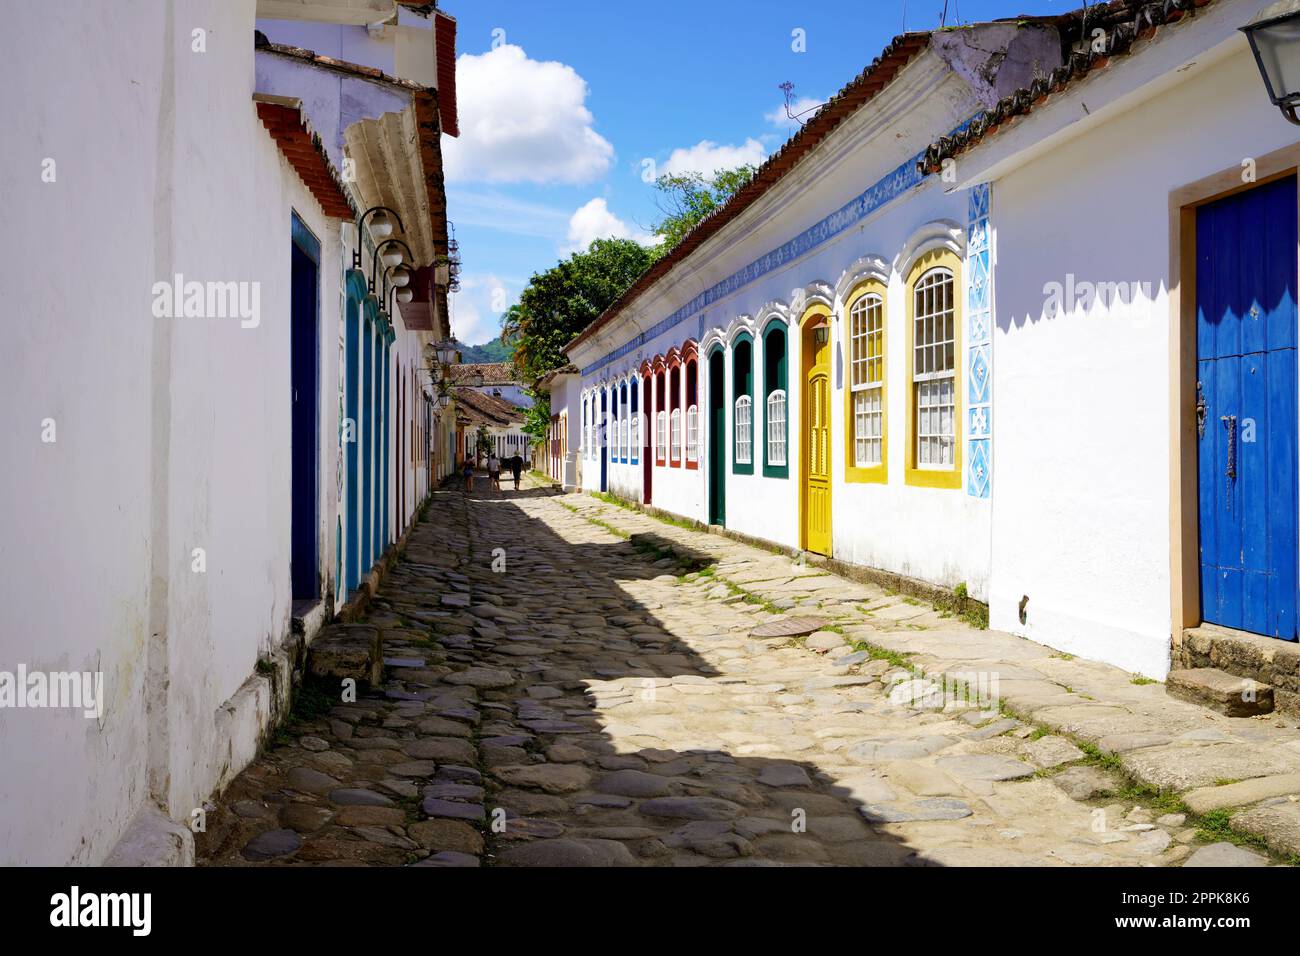 Street of historical center in Paraty, Rio de Janeiro, Brazil. Paraty is a preserved Portuguese colonial and Brazilian Imperial municipality. Stock Photo